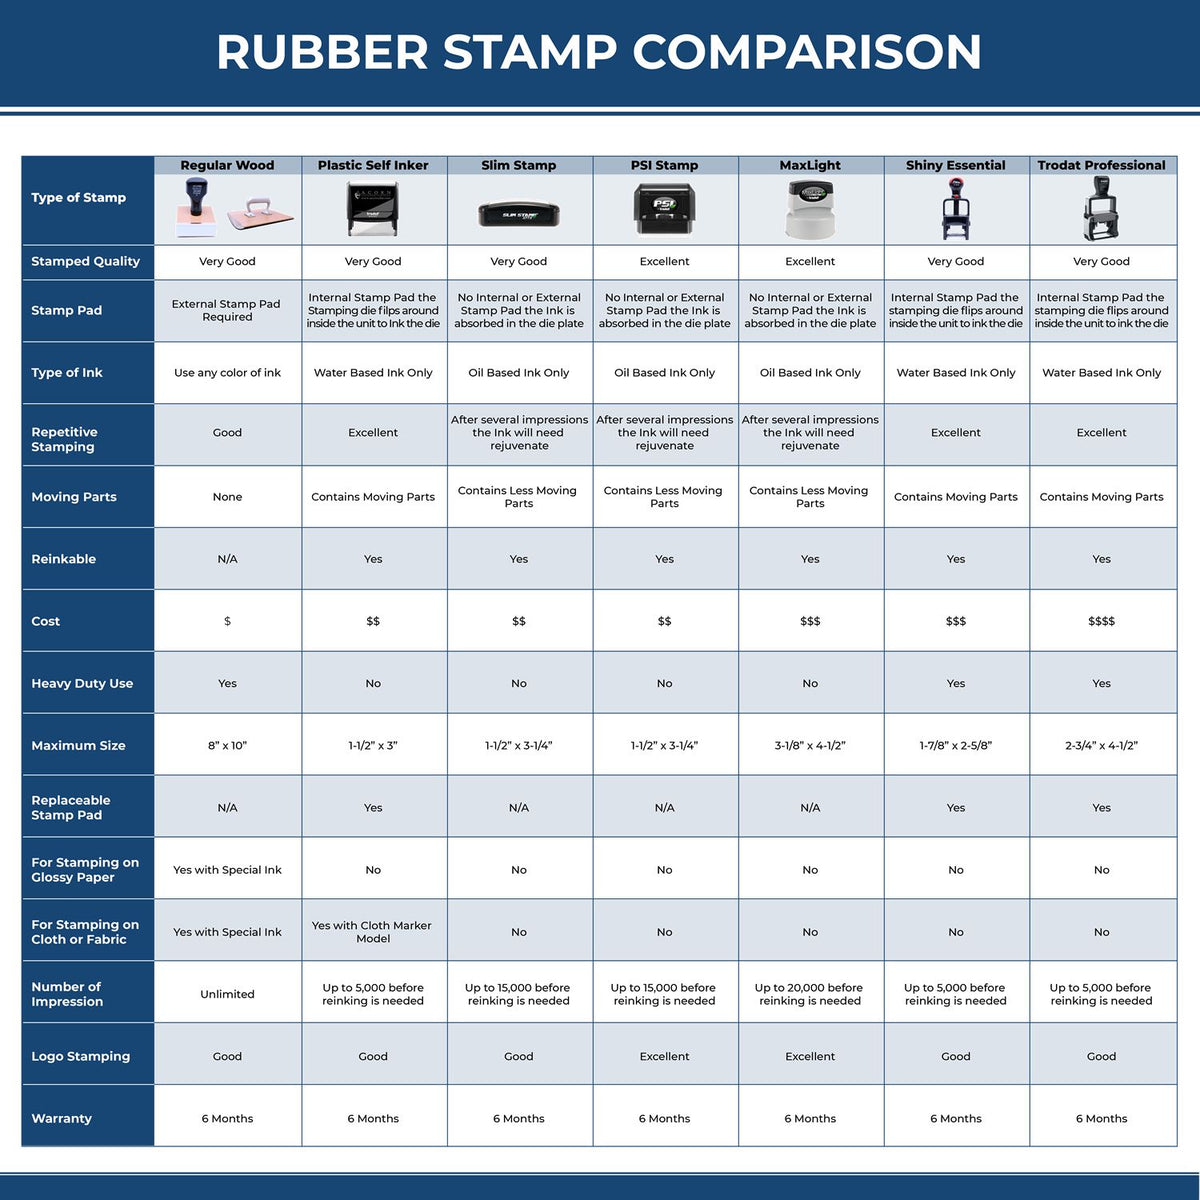 Large Home Equity Rubber Stamp 4554R Rubber Stamp Comparison